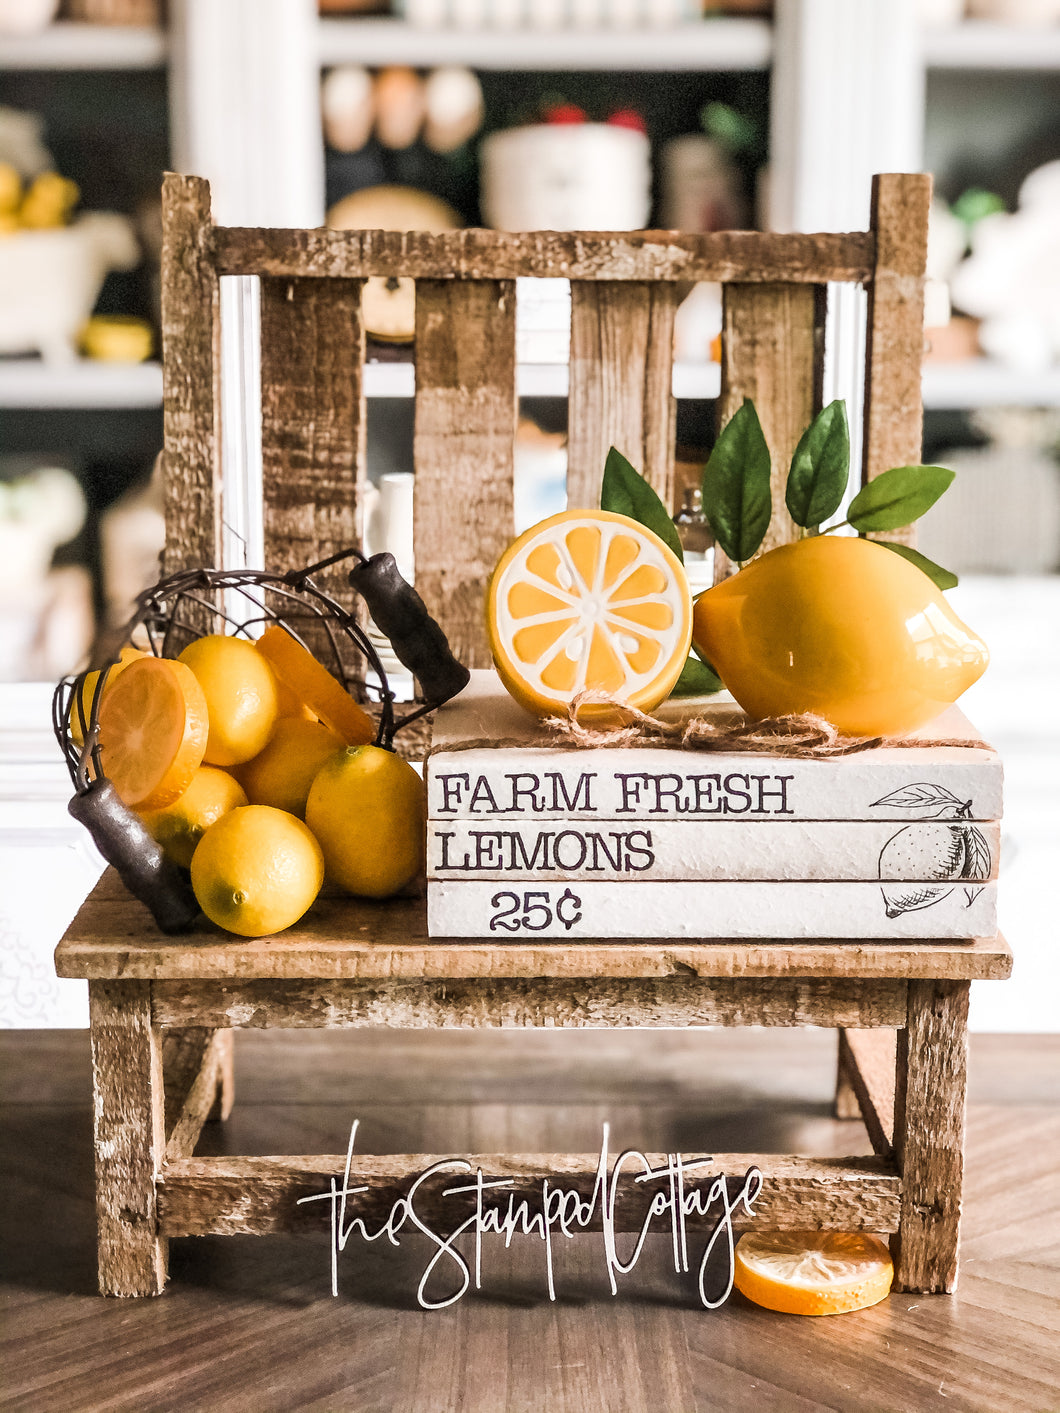 Stamped Book Stack - Farm Fresh Lemons 25 cents